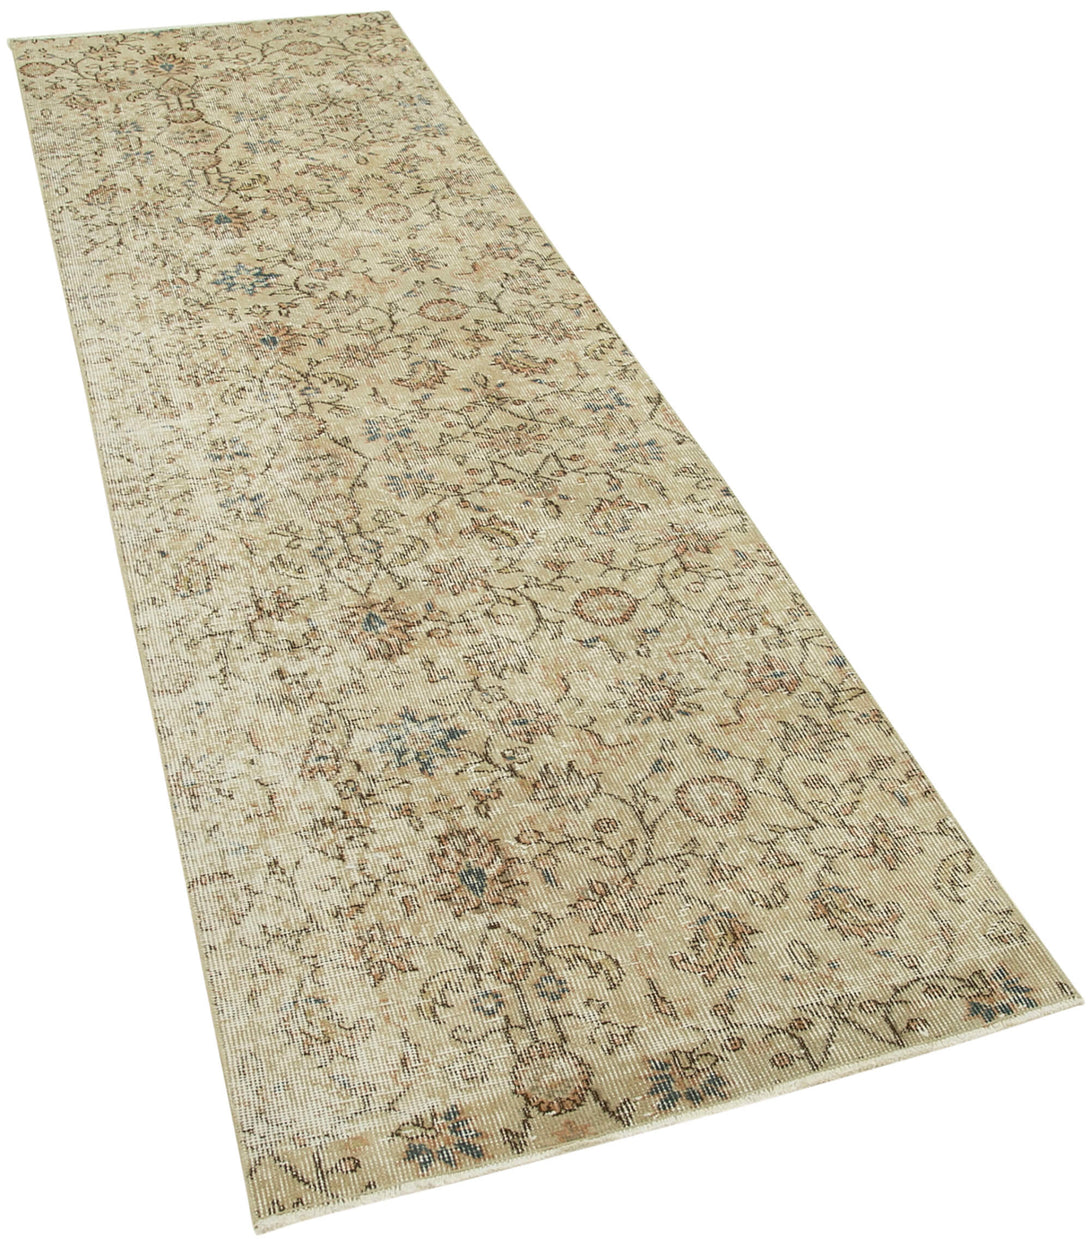 Handmade Overdyed Runner > Design# OL-AC-38146 > Size: 2'-7" x 9'-5", Carpet Culture Rugs, Handmade Rugs, NYC Rugs, New Rugs, Shop Rugs, Rug Store, Outlet Rugs, SoHo Rugs, Rugs in USA